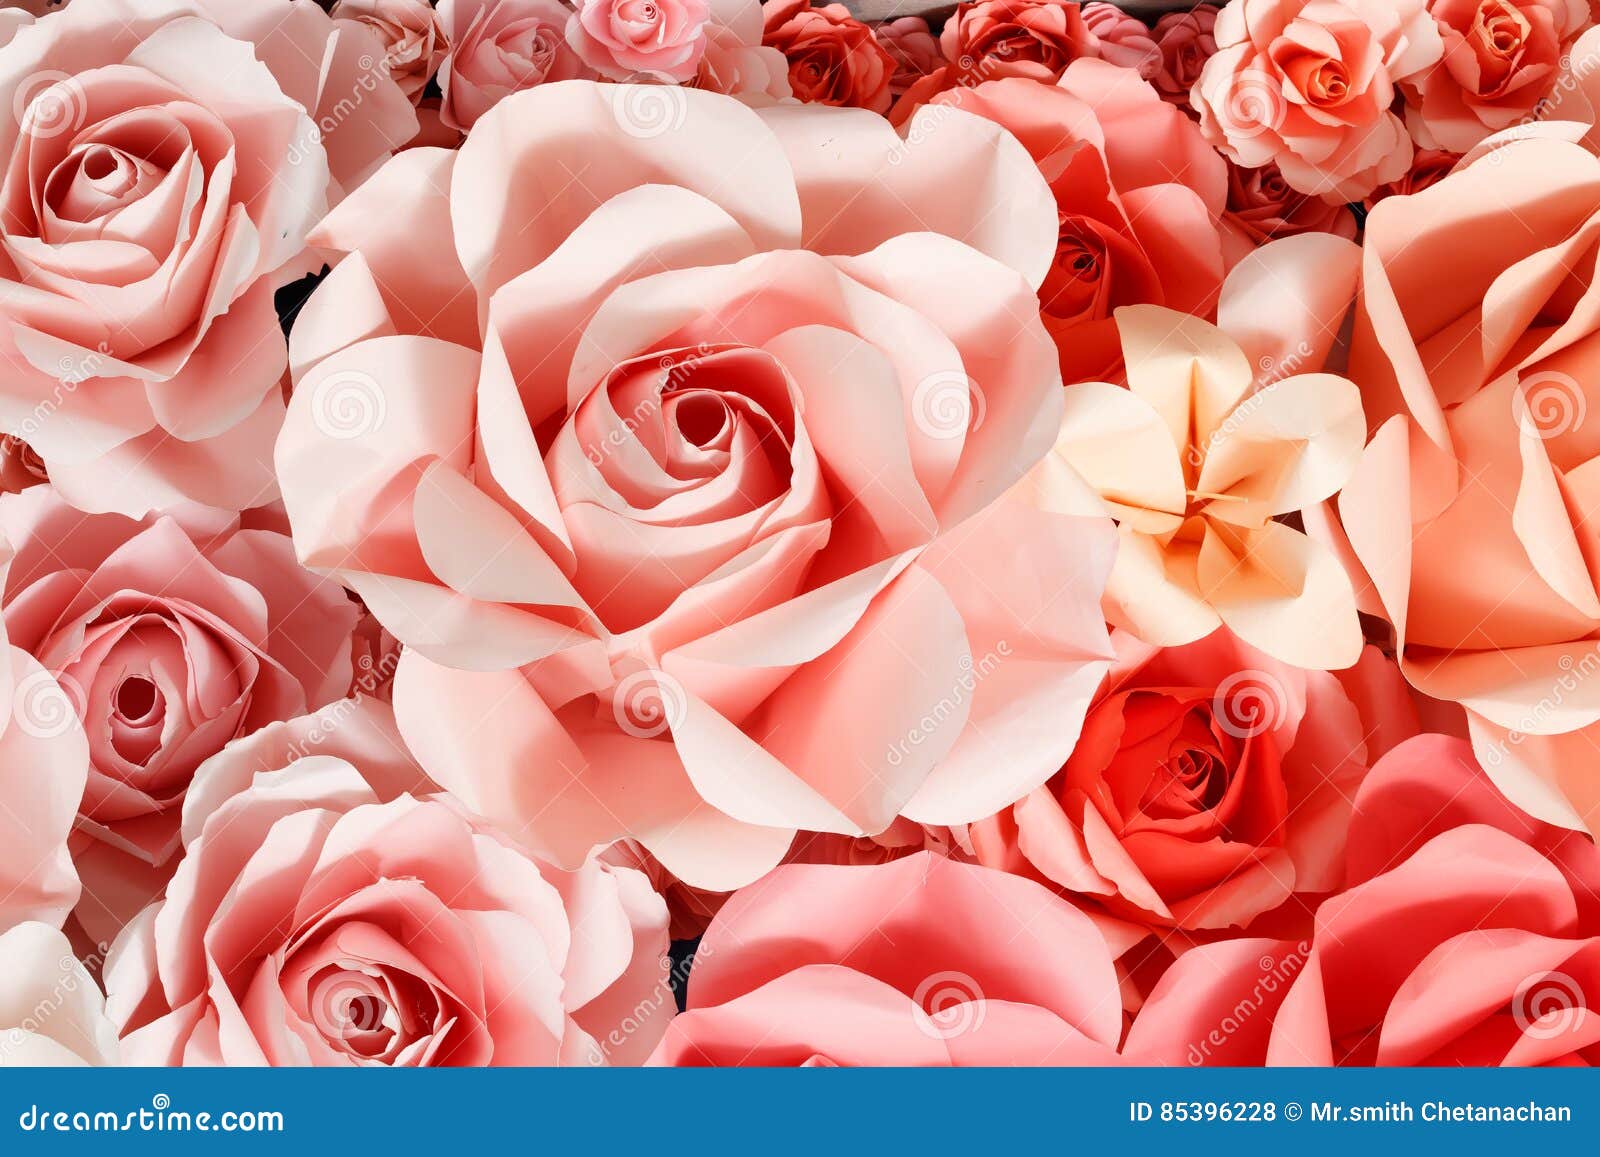 Rose background from paper stock photo. Image of beautiful - 85396228